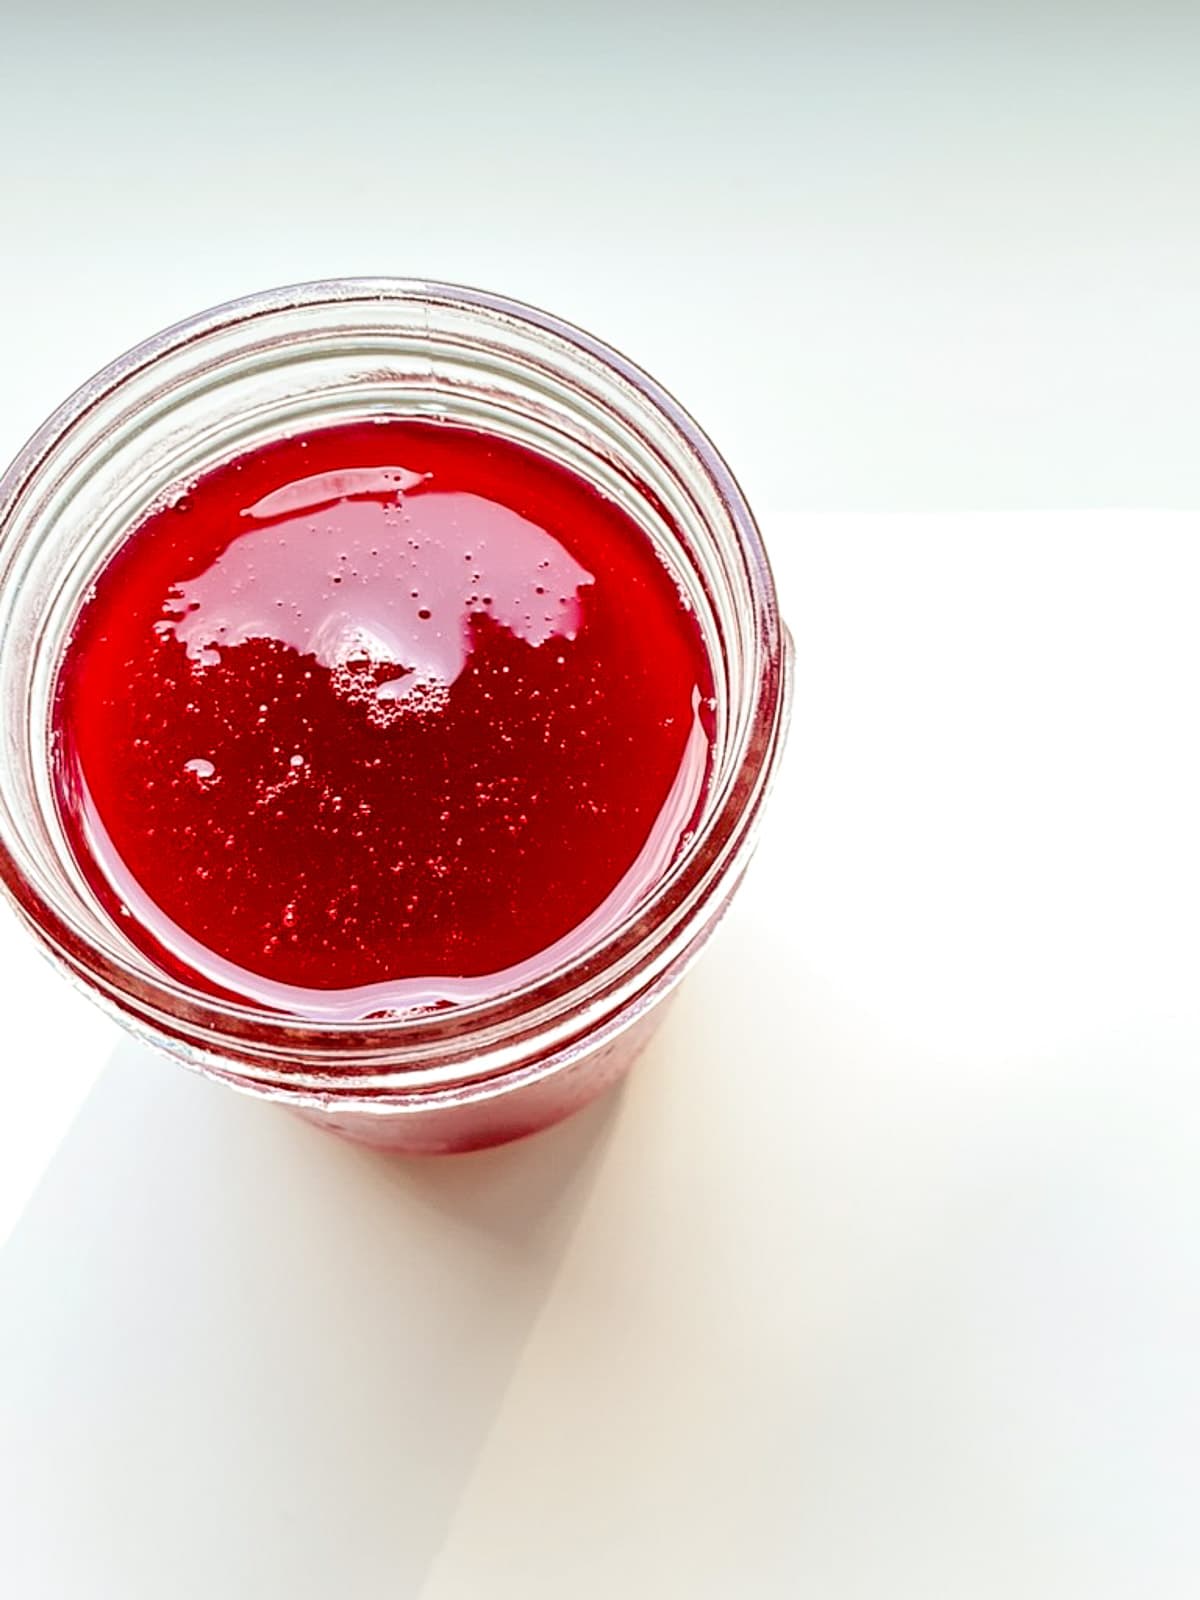 An image of rhubarb syrup in a glass jar.